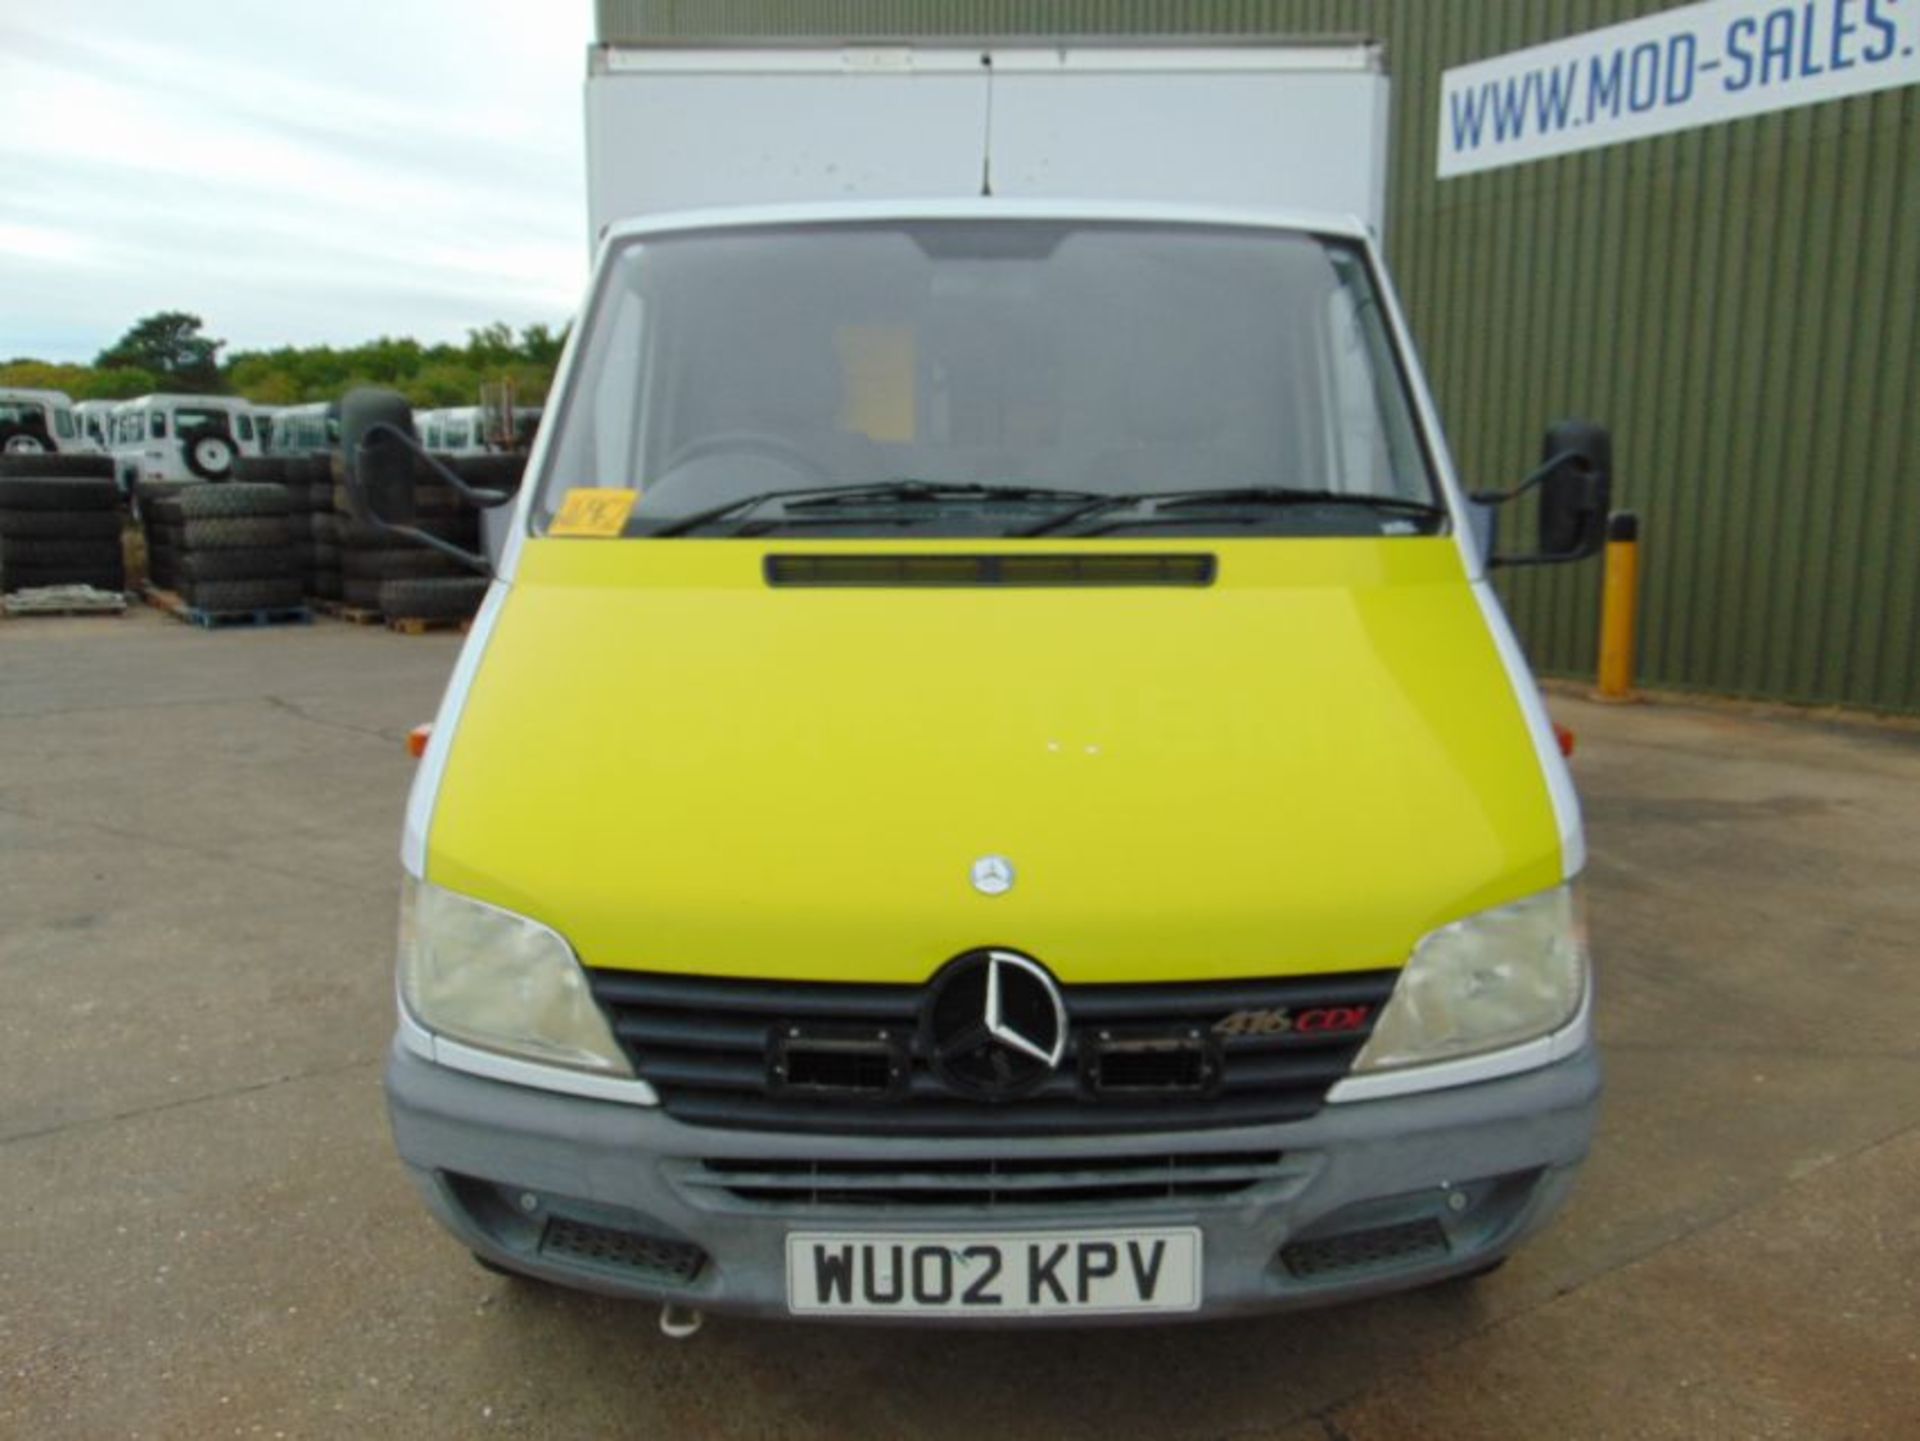 Recent Released by Atomic Weapons Establishment a 2002 Mercedes 418 CDi Ambulance ONLY 32,825 Miles! - Image 2 of 34